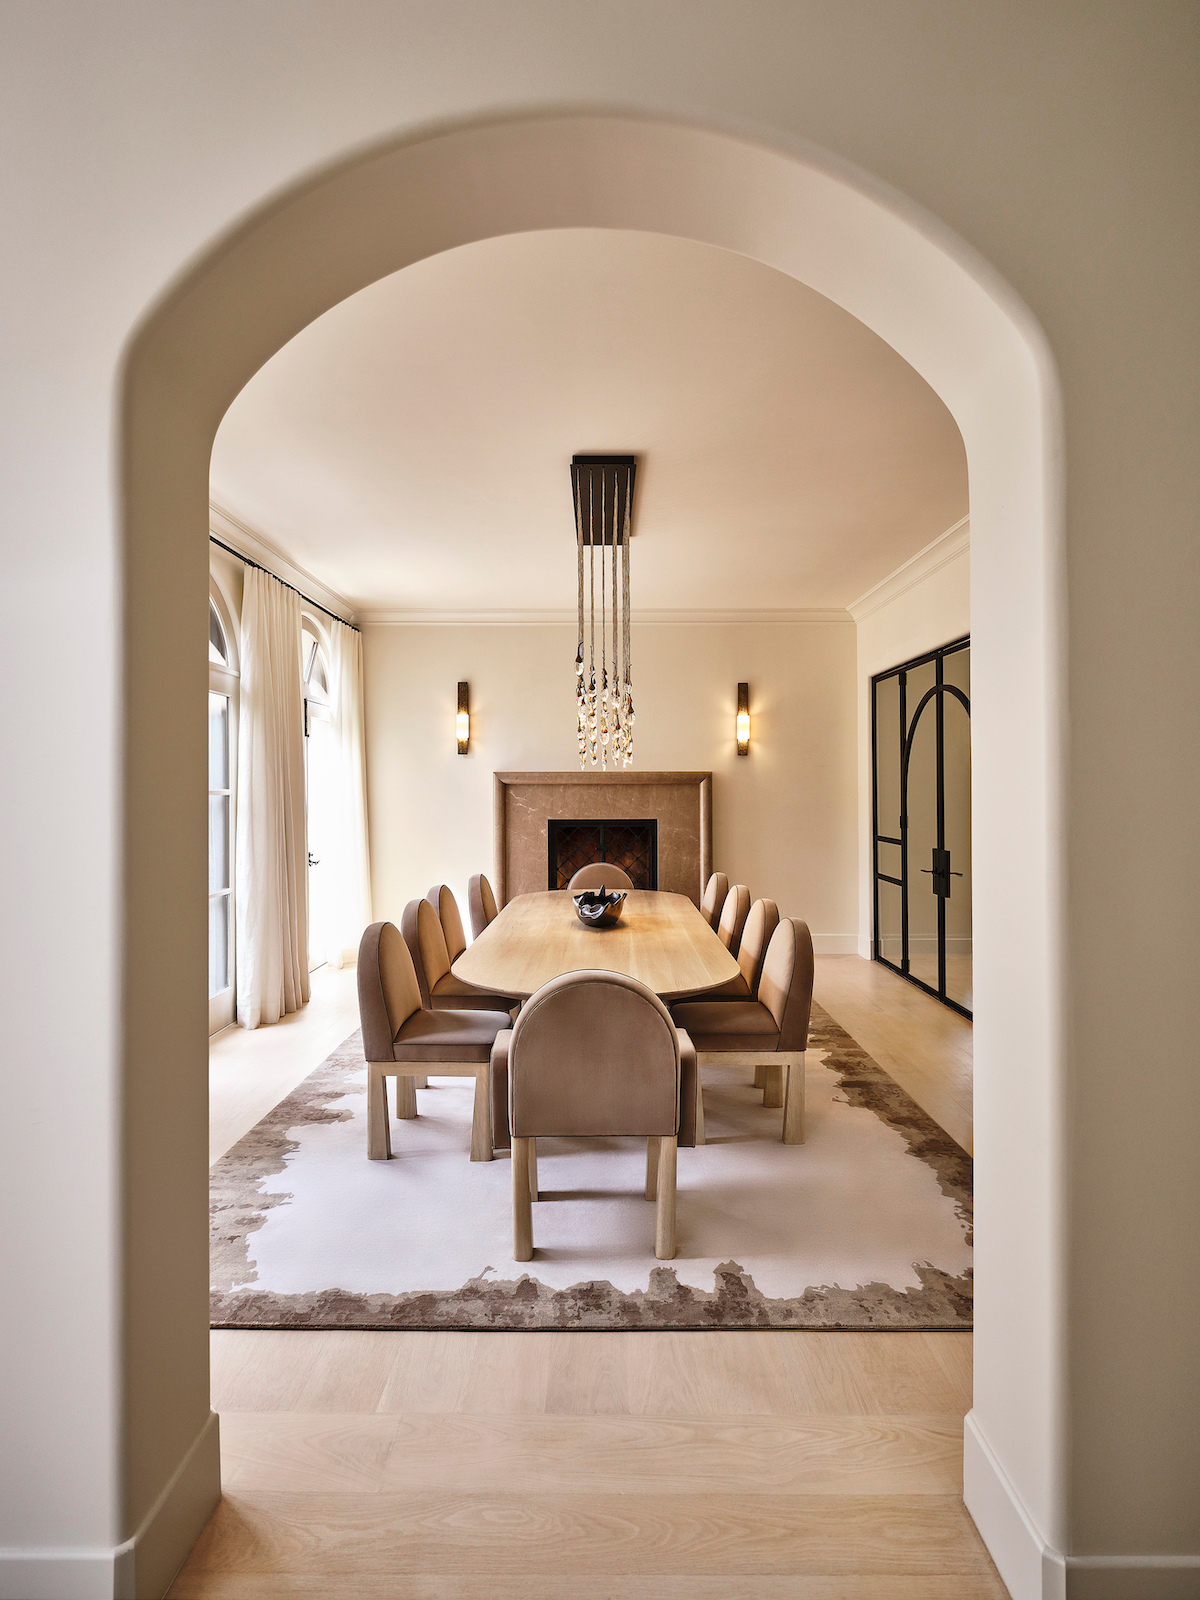 dining area interior design showing monochrome walls, archway, dining chair and table by design milk